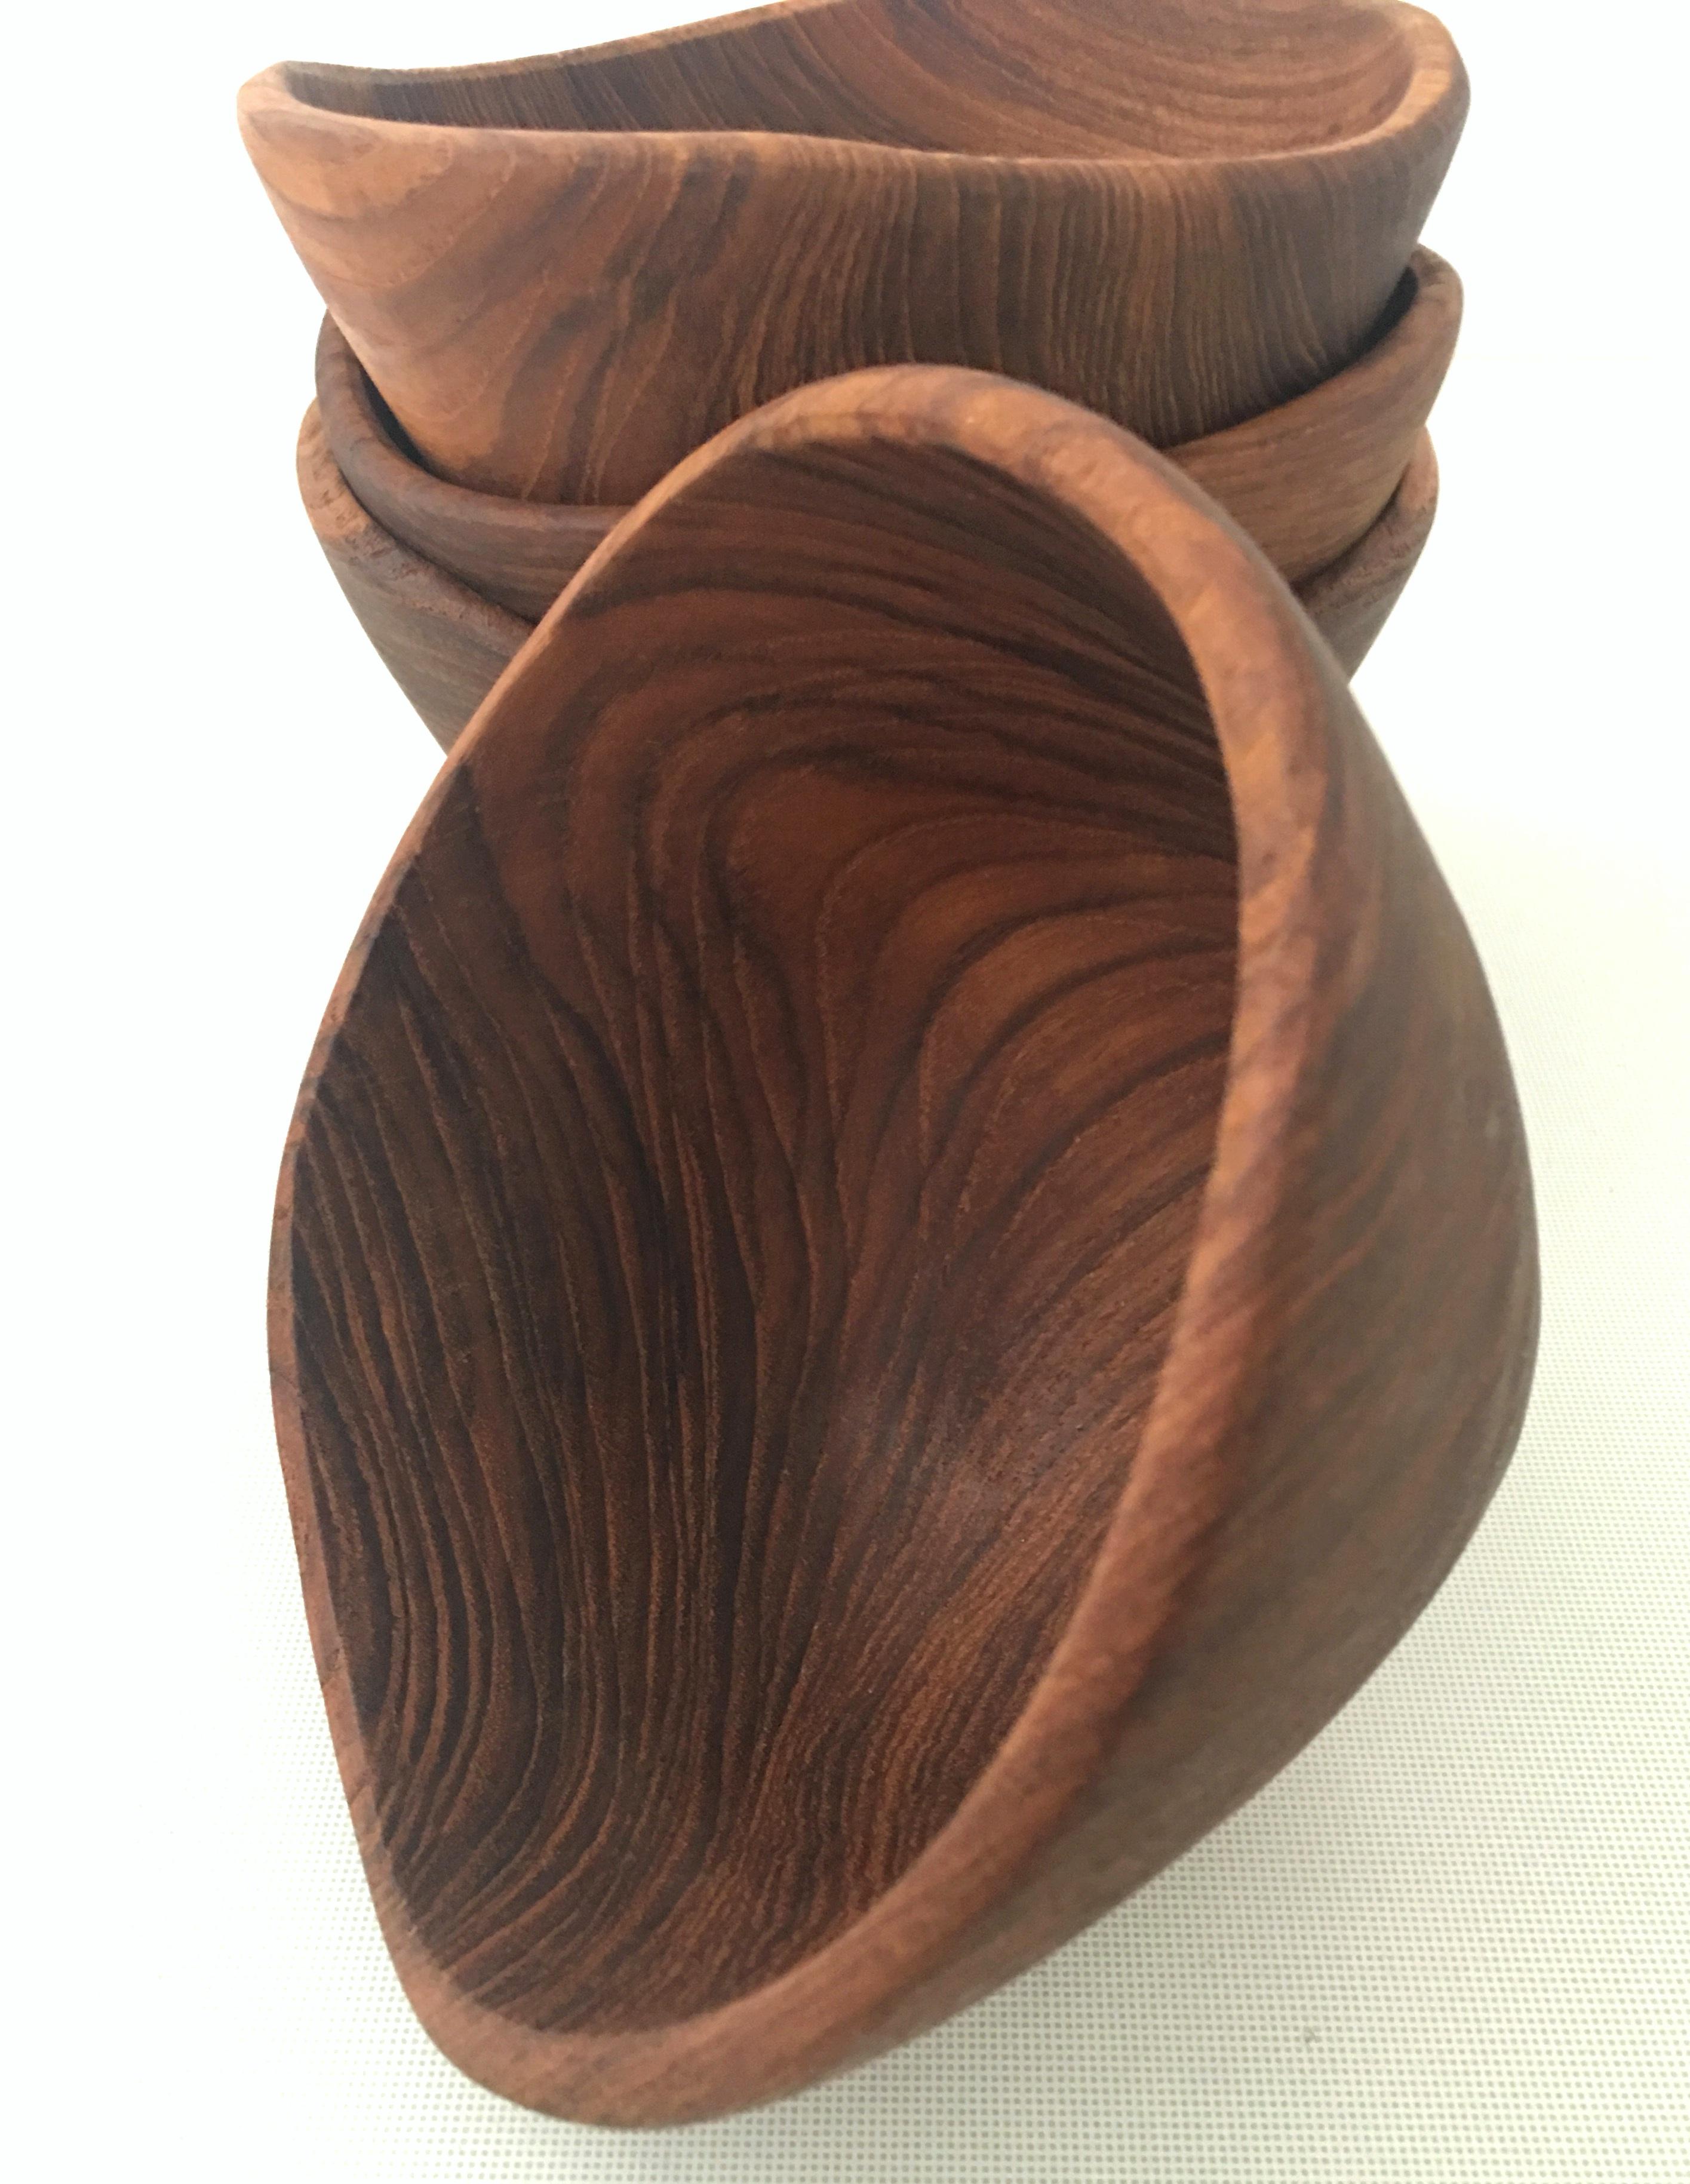 Vintage Modern Organic Form Teak Serving Bowl Set of Seven Pieces In Good Condition For Sale In West Palm Beach, FL